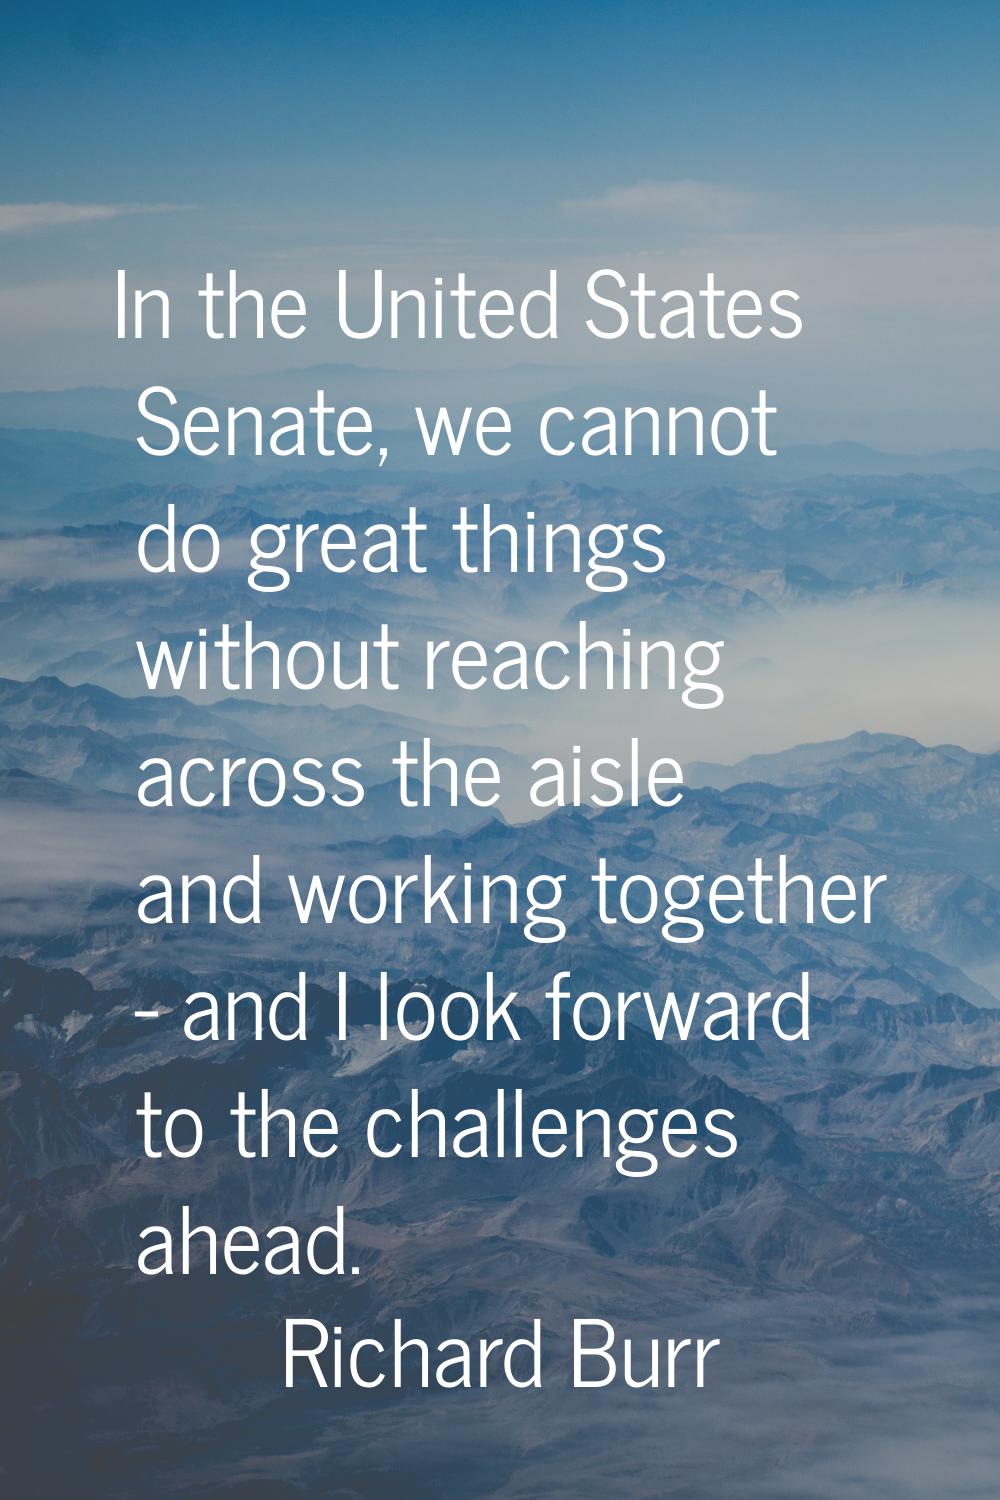 In the United States Senate, we cannot do great things without reaching across the aisle and workin